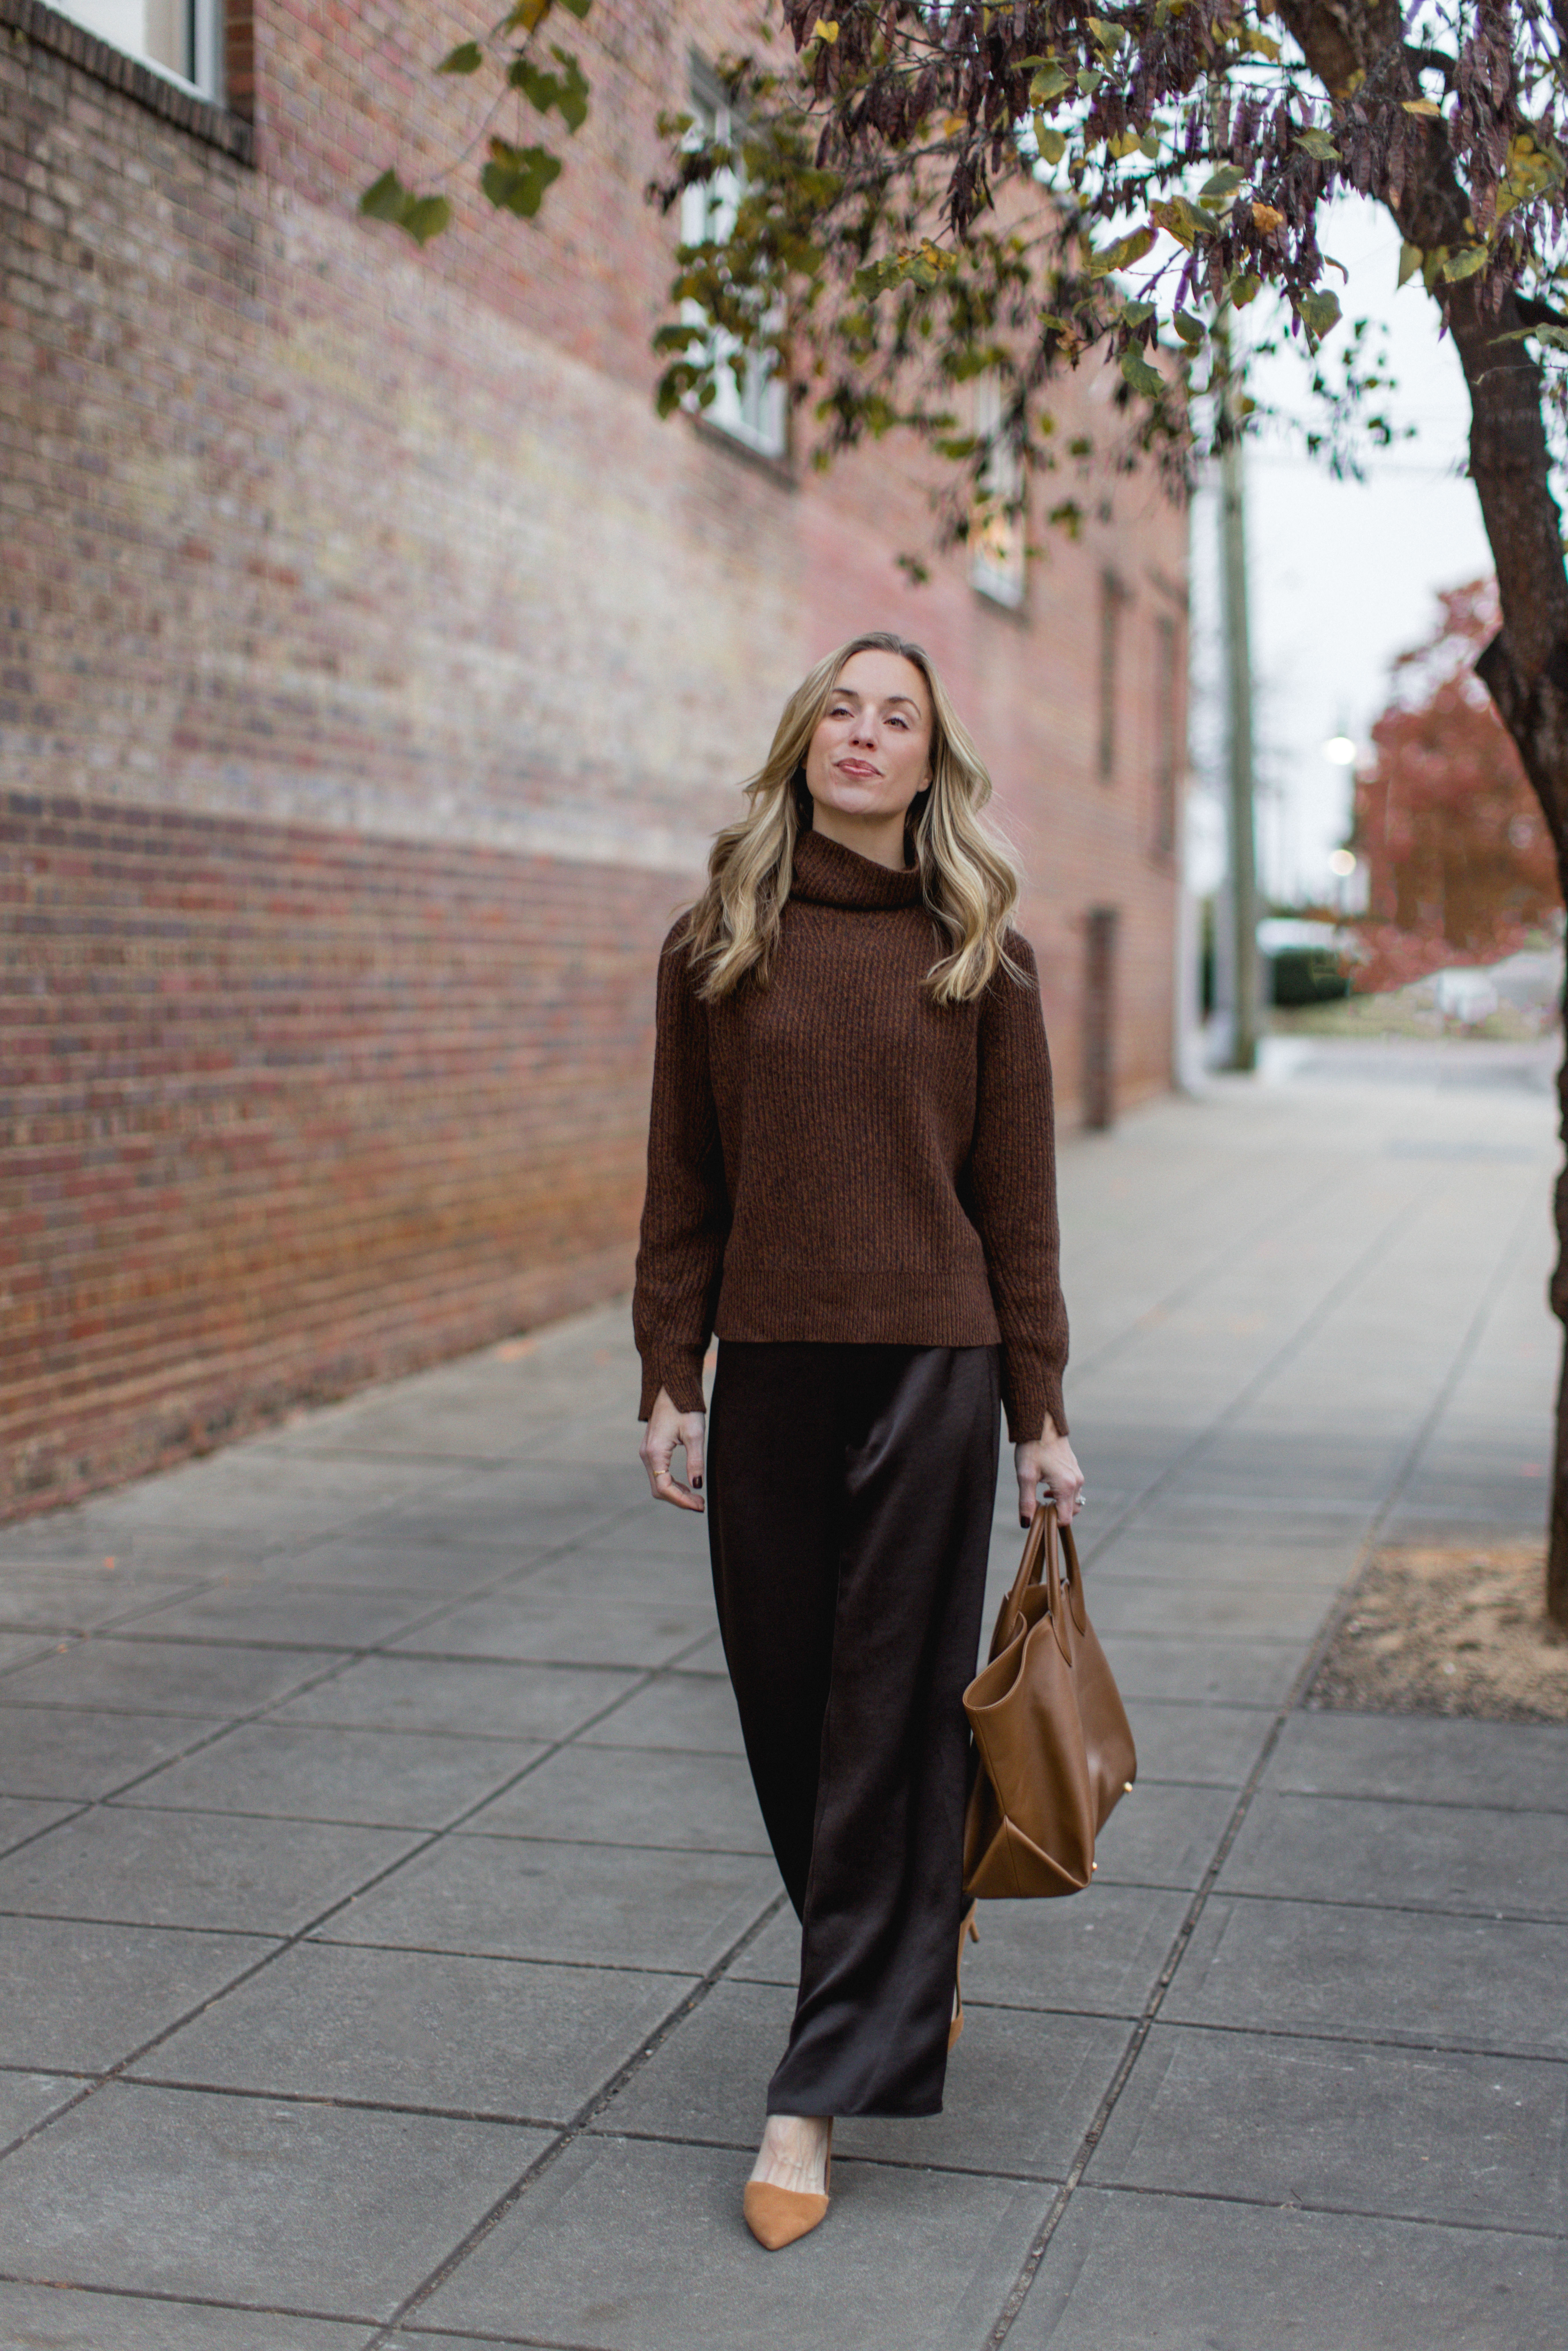 outfit mixing fall and winter fabric textures